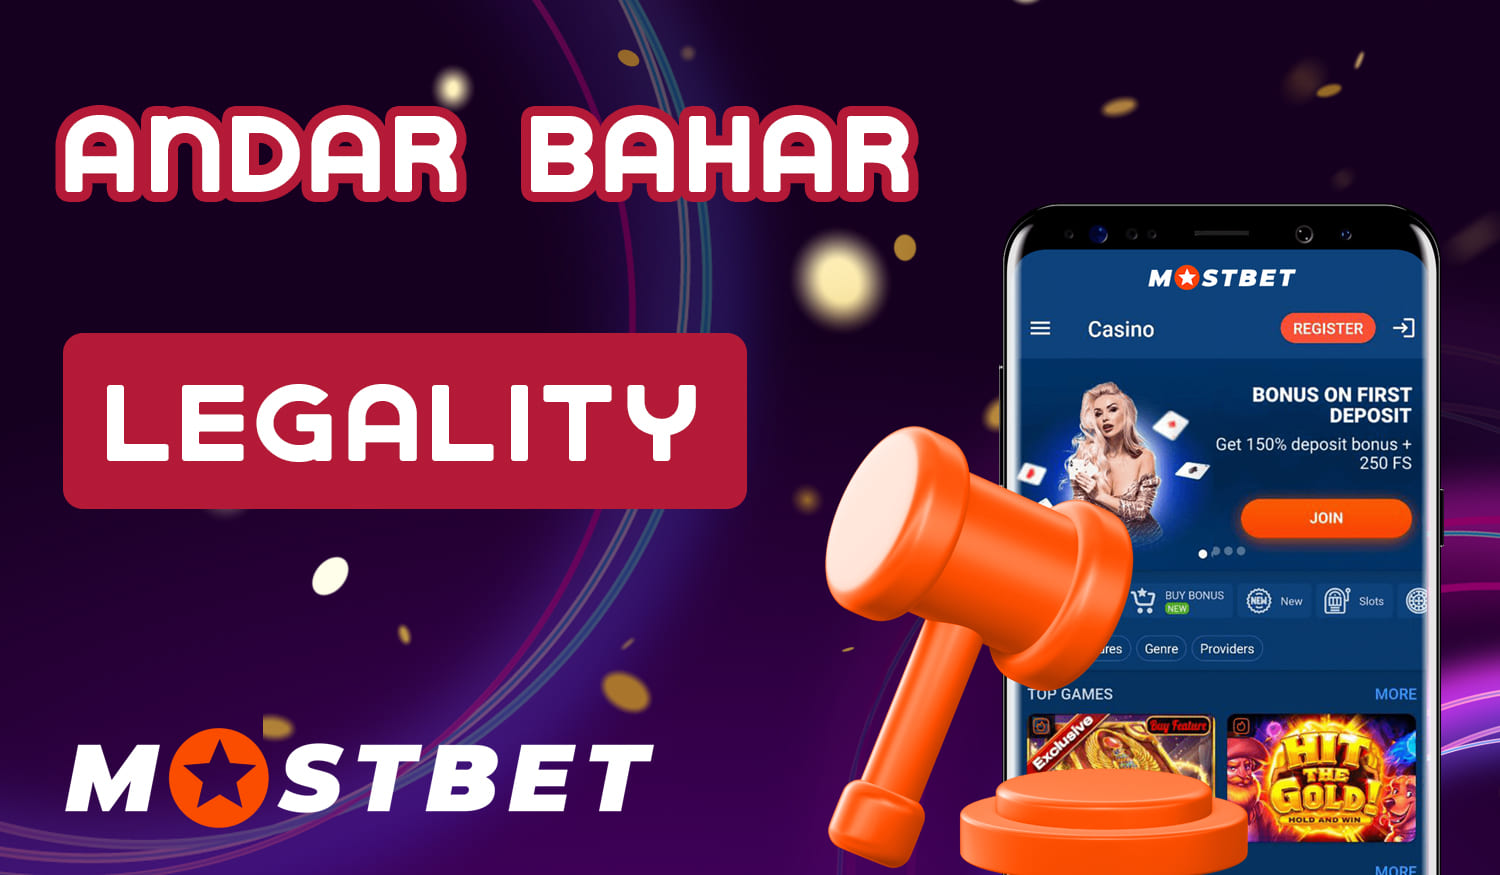 How legally Mostbet users from India can play Andar Bahar on the site